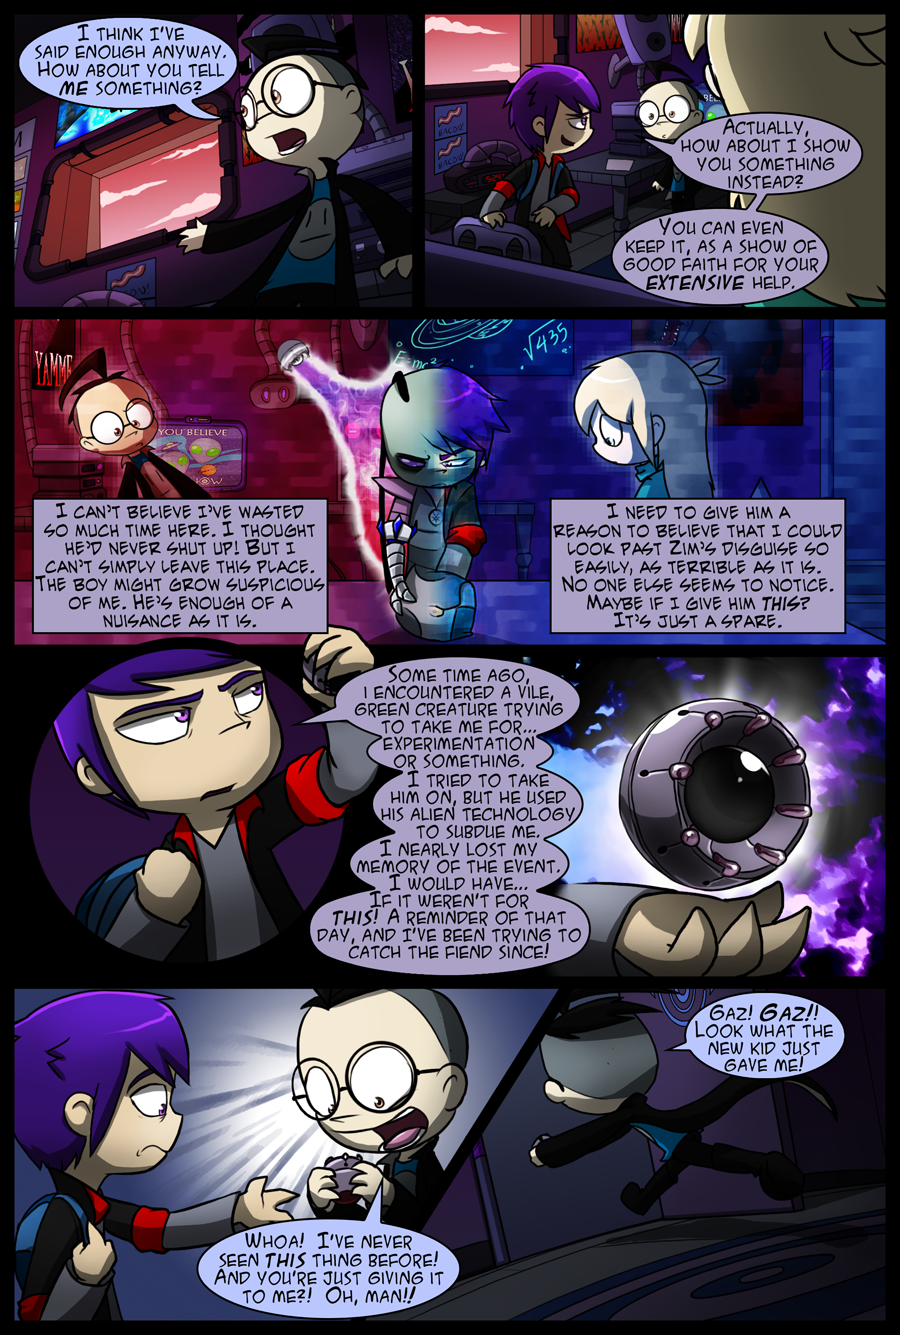 Most recent image: Duality Chapter 2 - Page 14